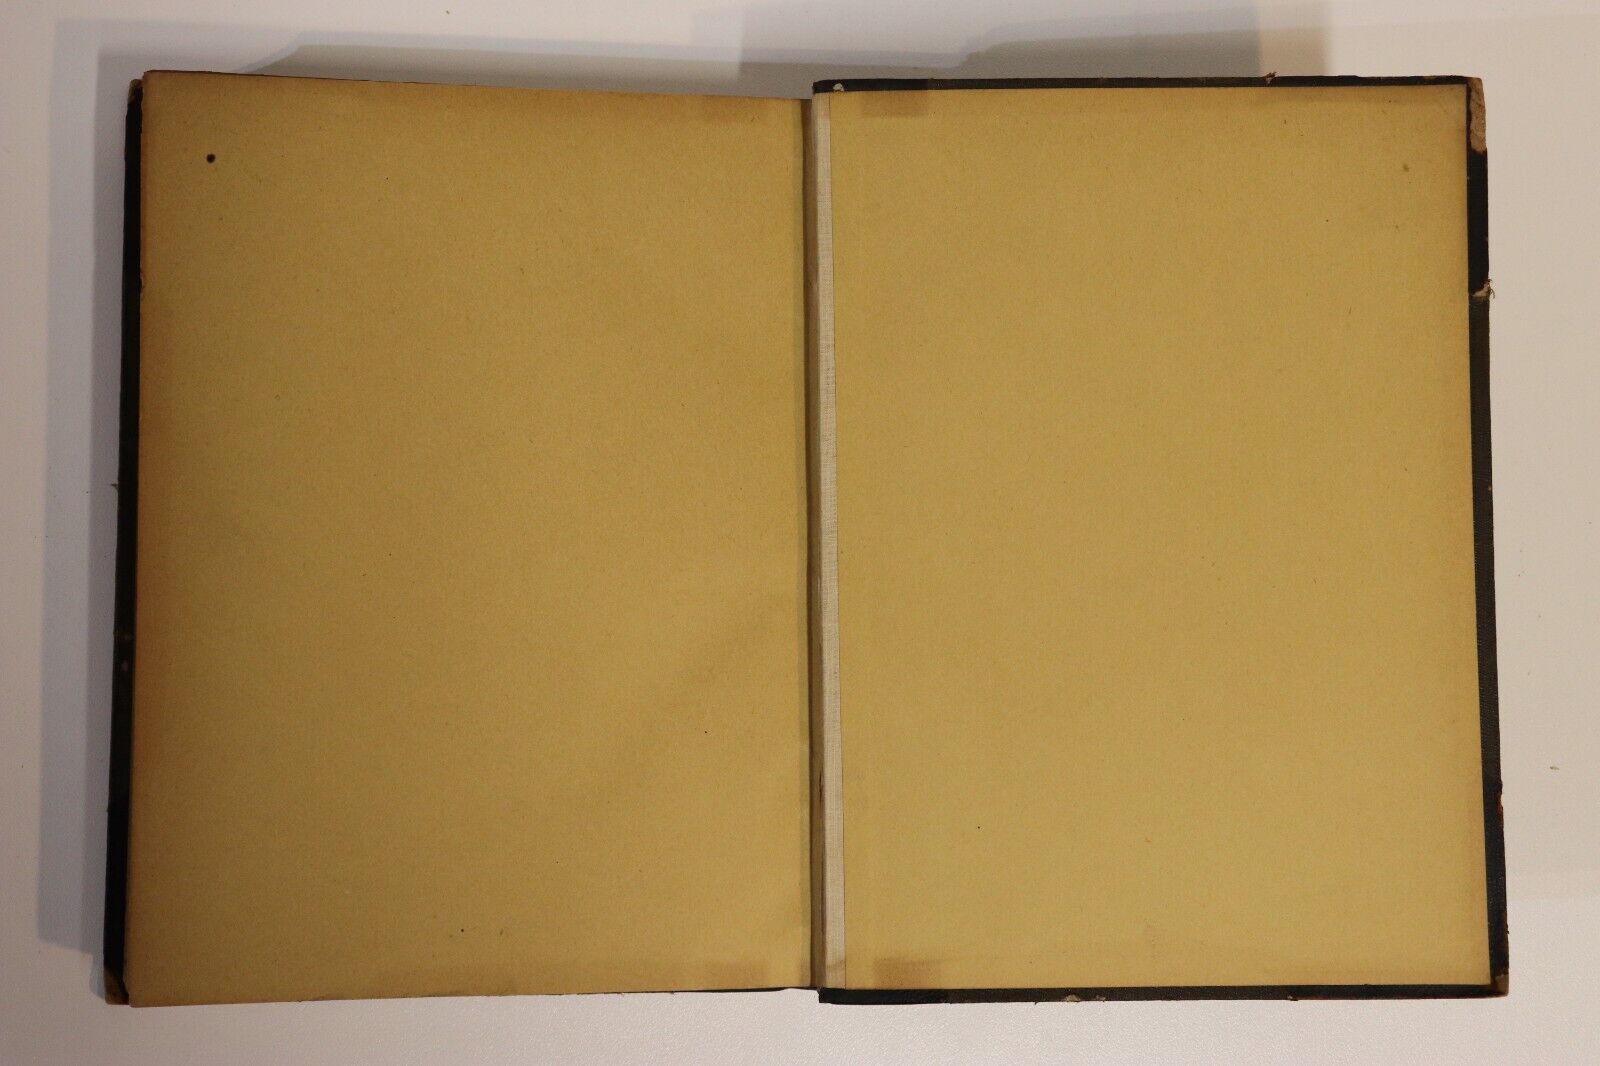 General Electric Review Magazine - 1927 - Antique Technical Reference Book